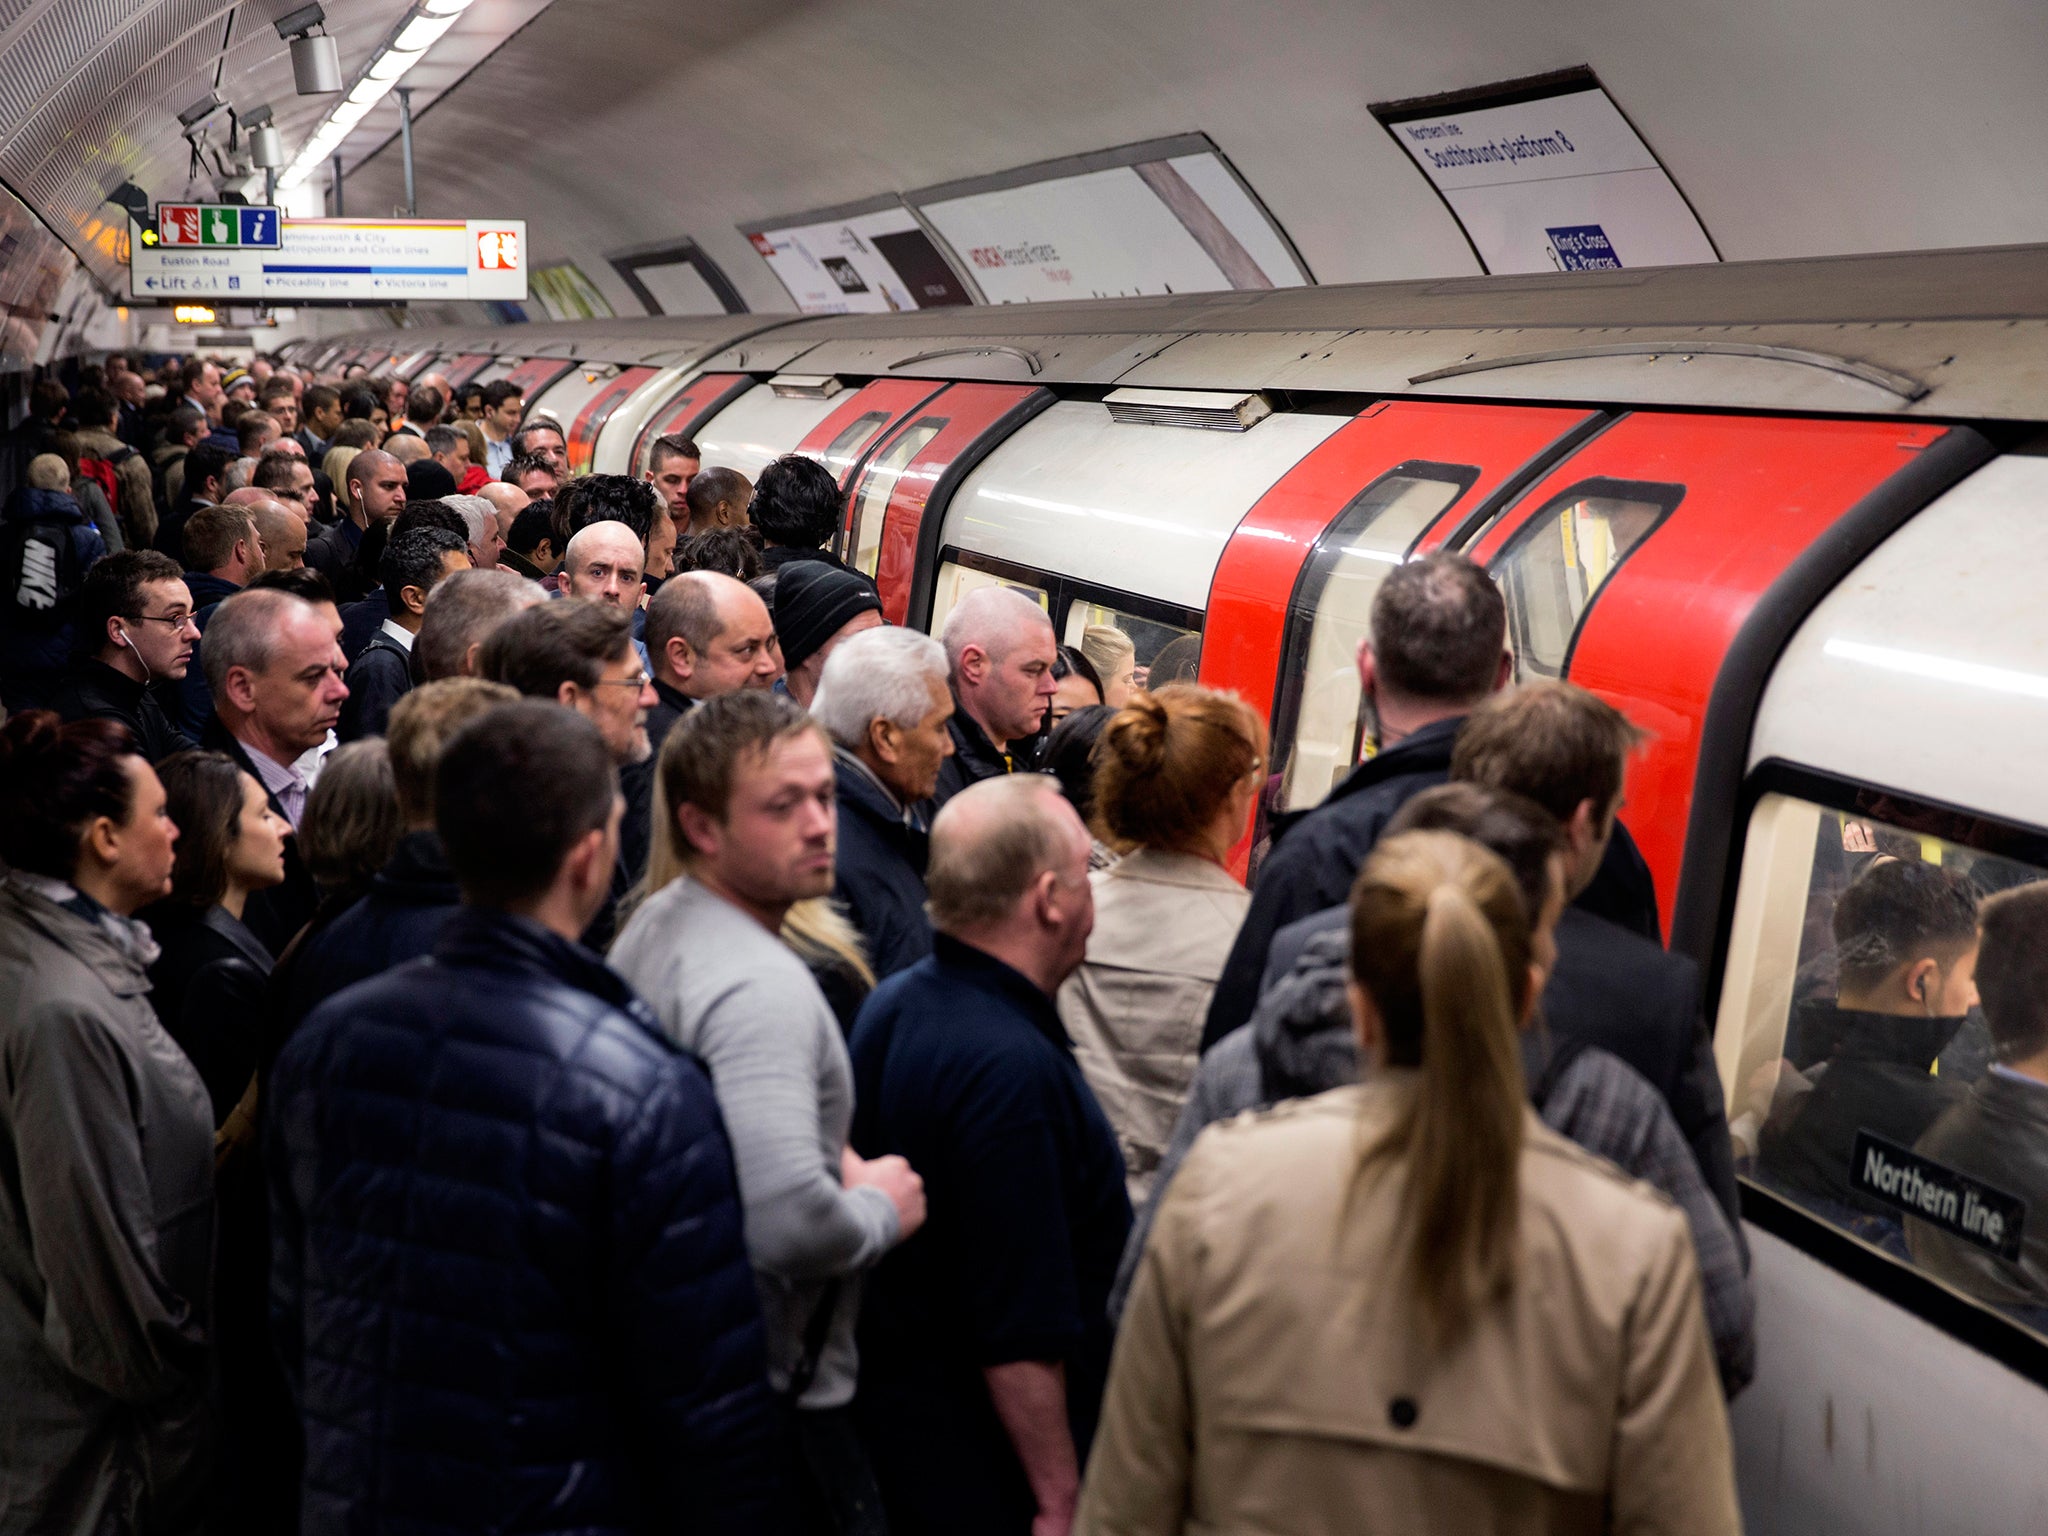 London Commuters have been subjected to three days of severe disruptions and delays across the network